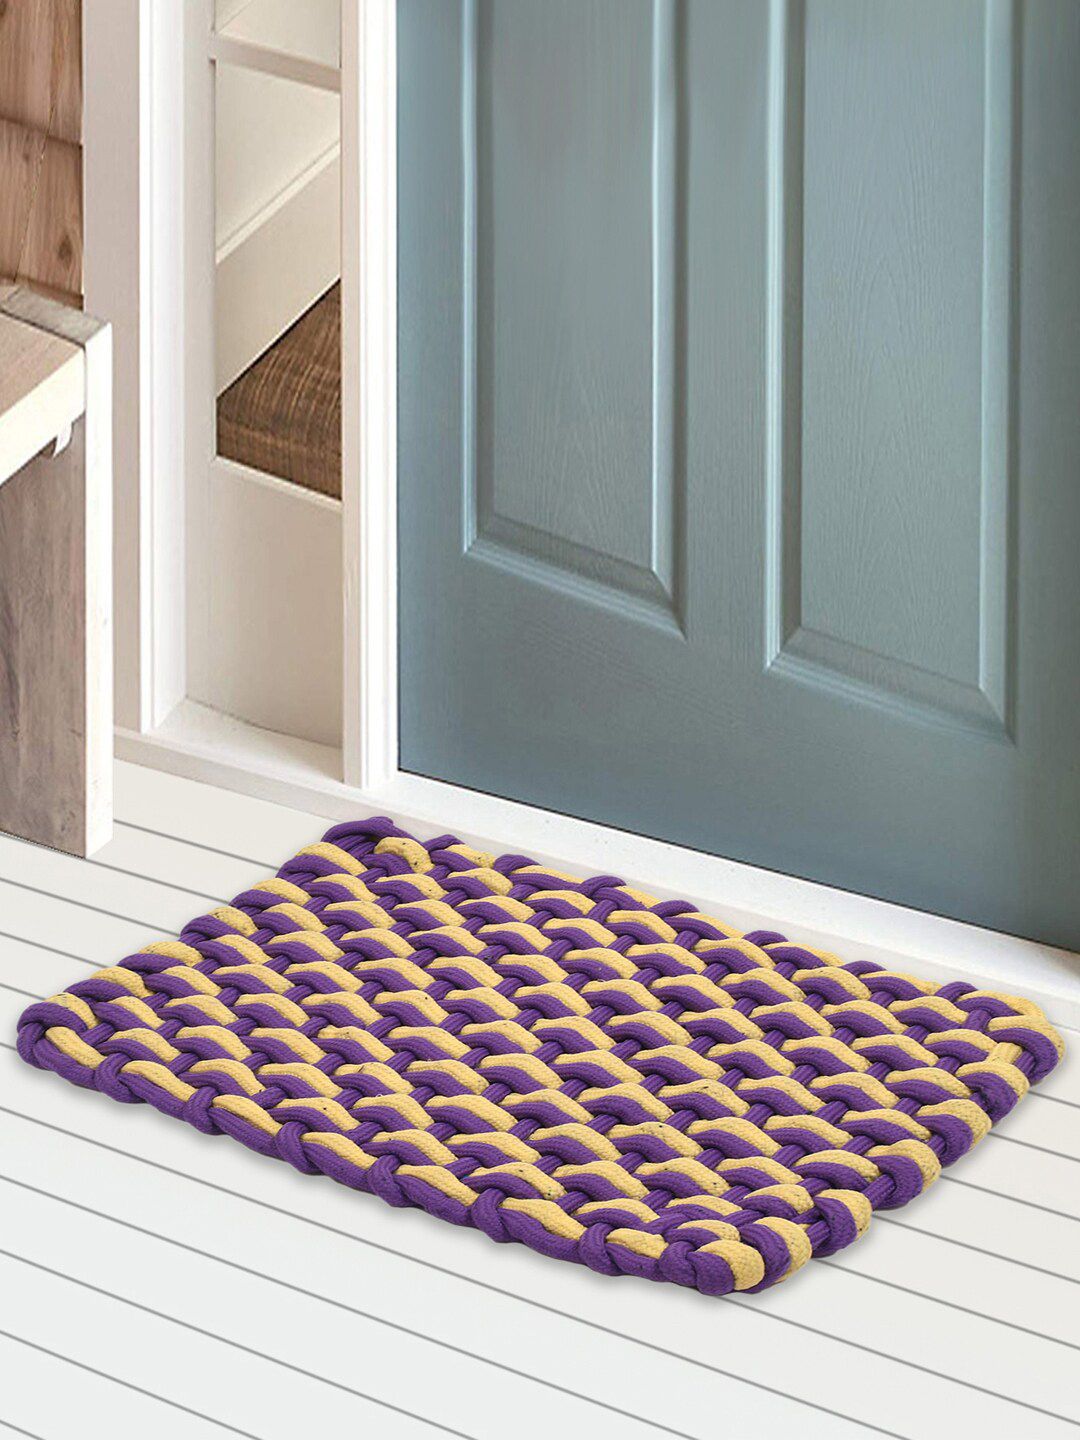 Kuber Industries Pack of 2 Purple & Yellow Striped Anti-Skid Cotton Doormats Price in India